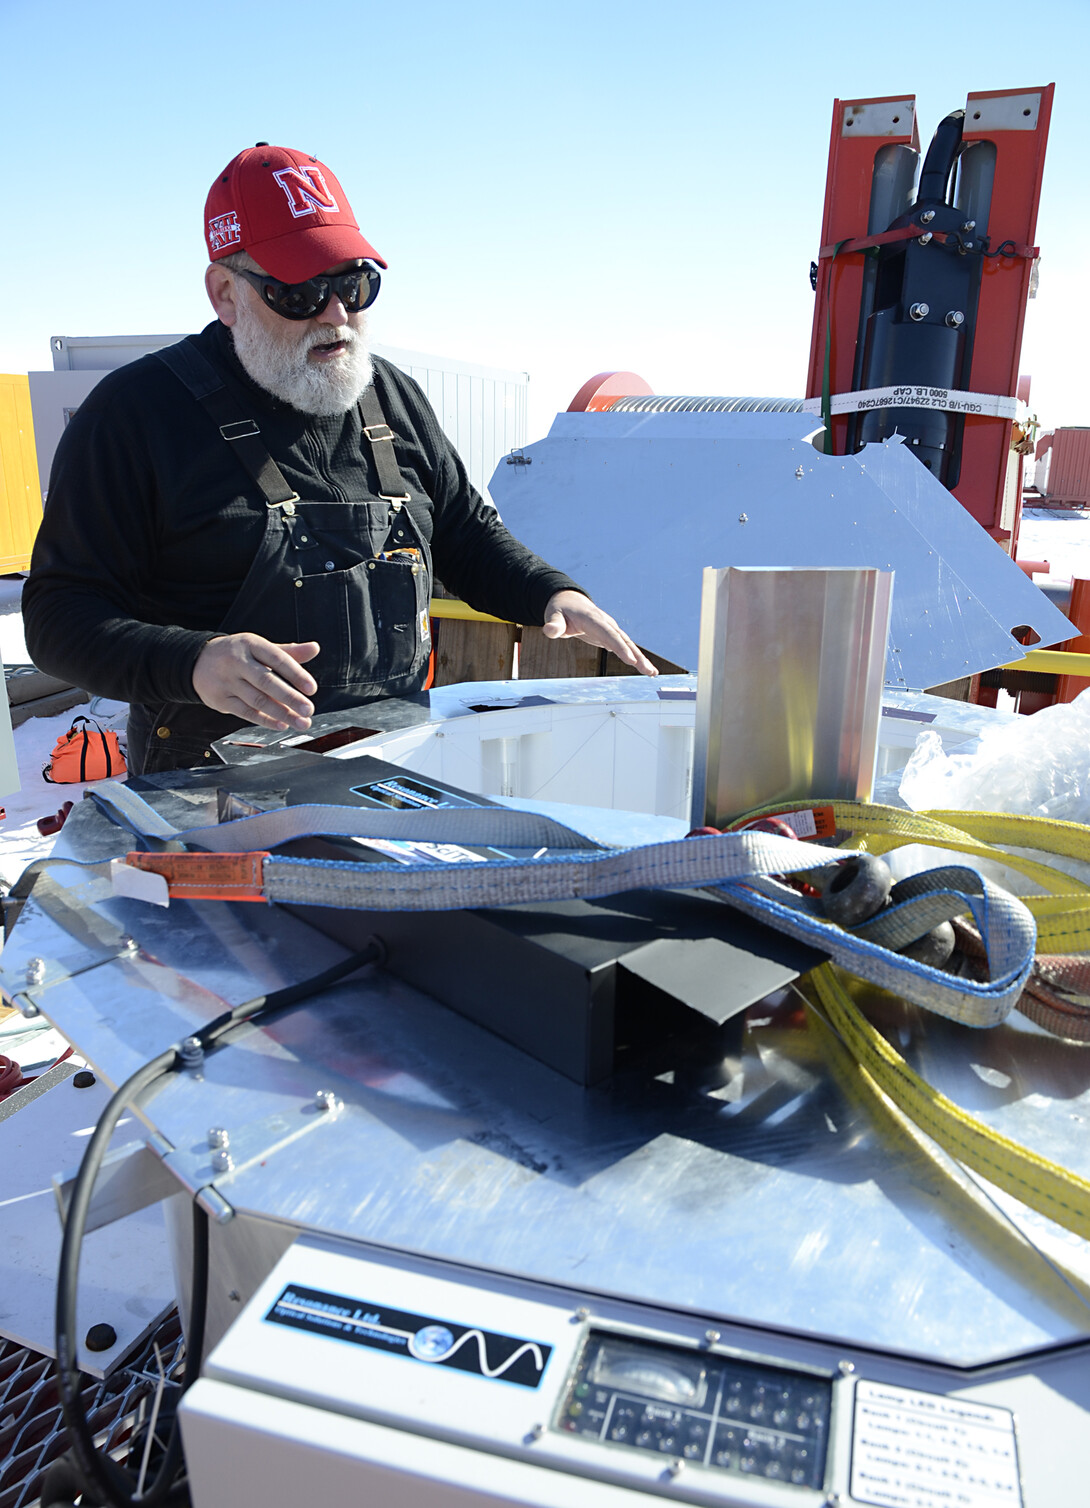 During December testing of the drill, Frank Rack explains the operation of the drill's UV collar used ot decontaminate hoses and cables to be deployed downhole.